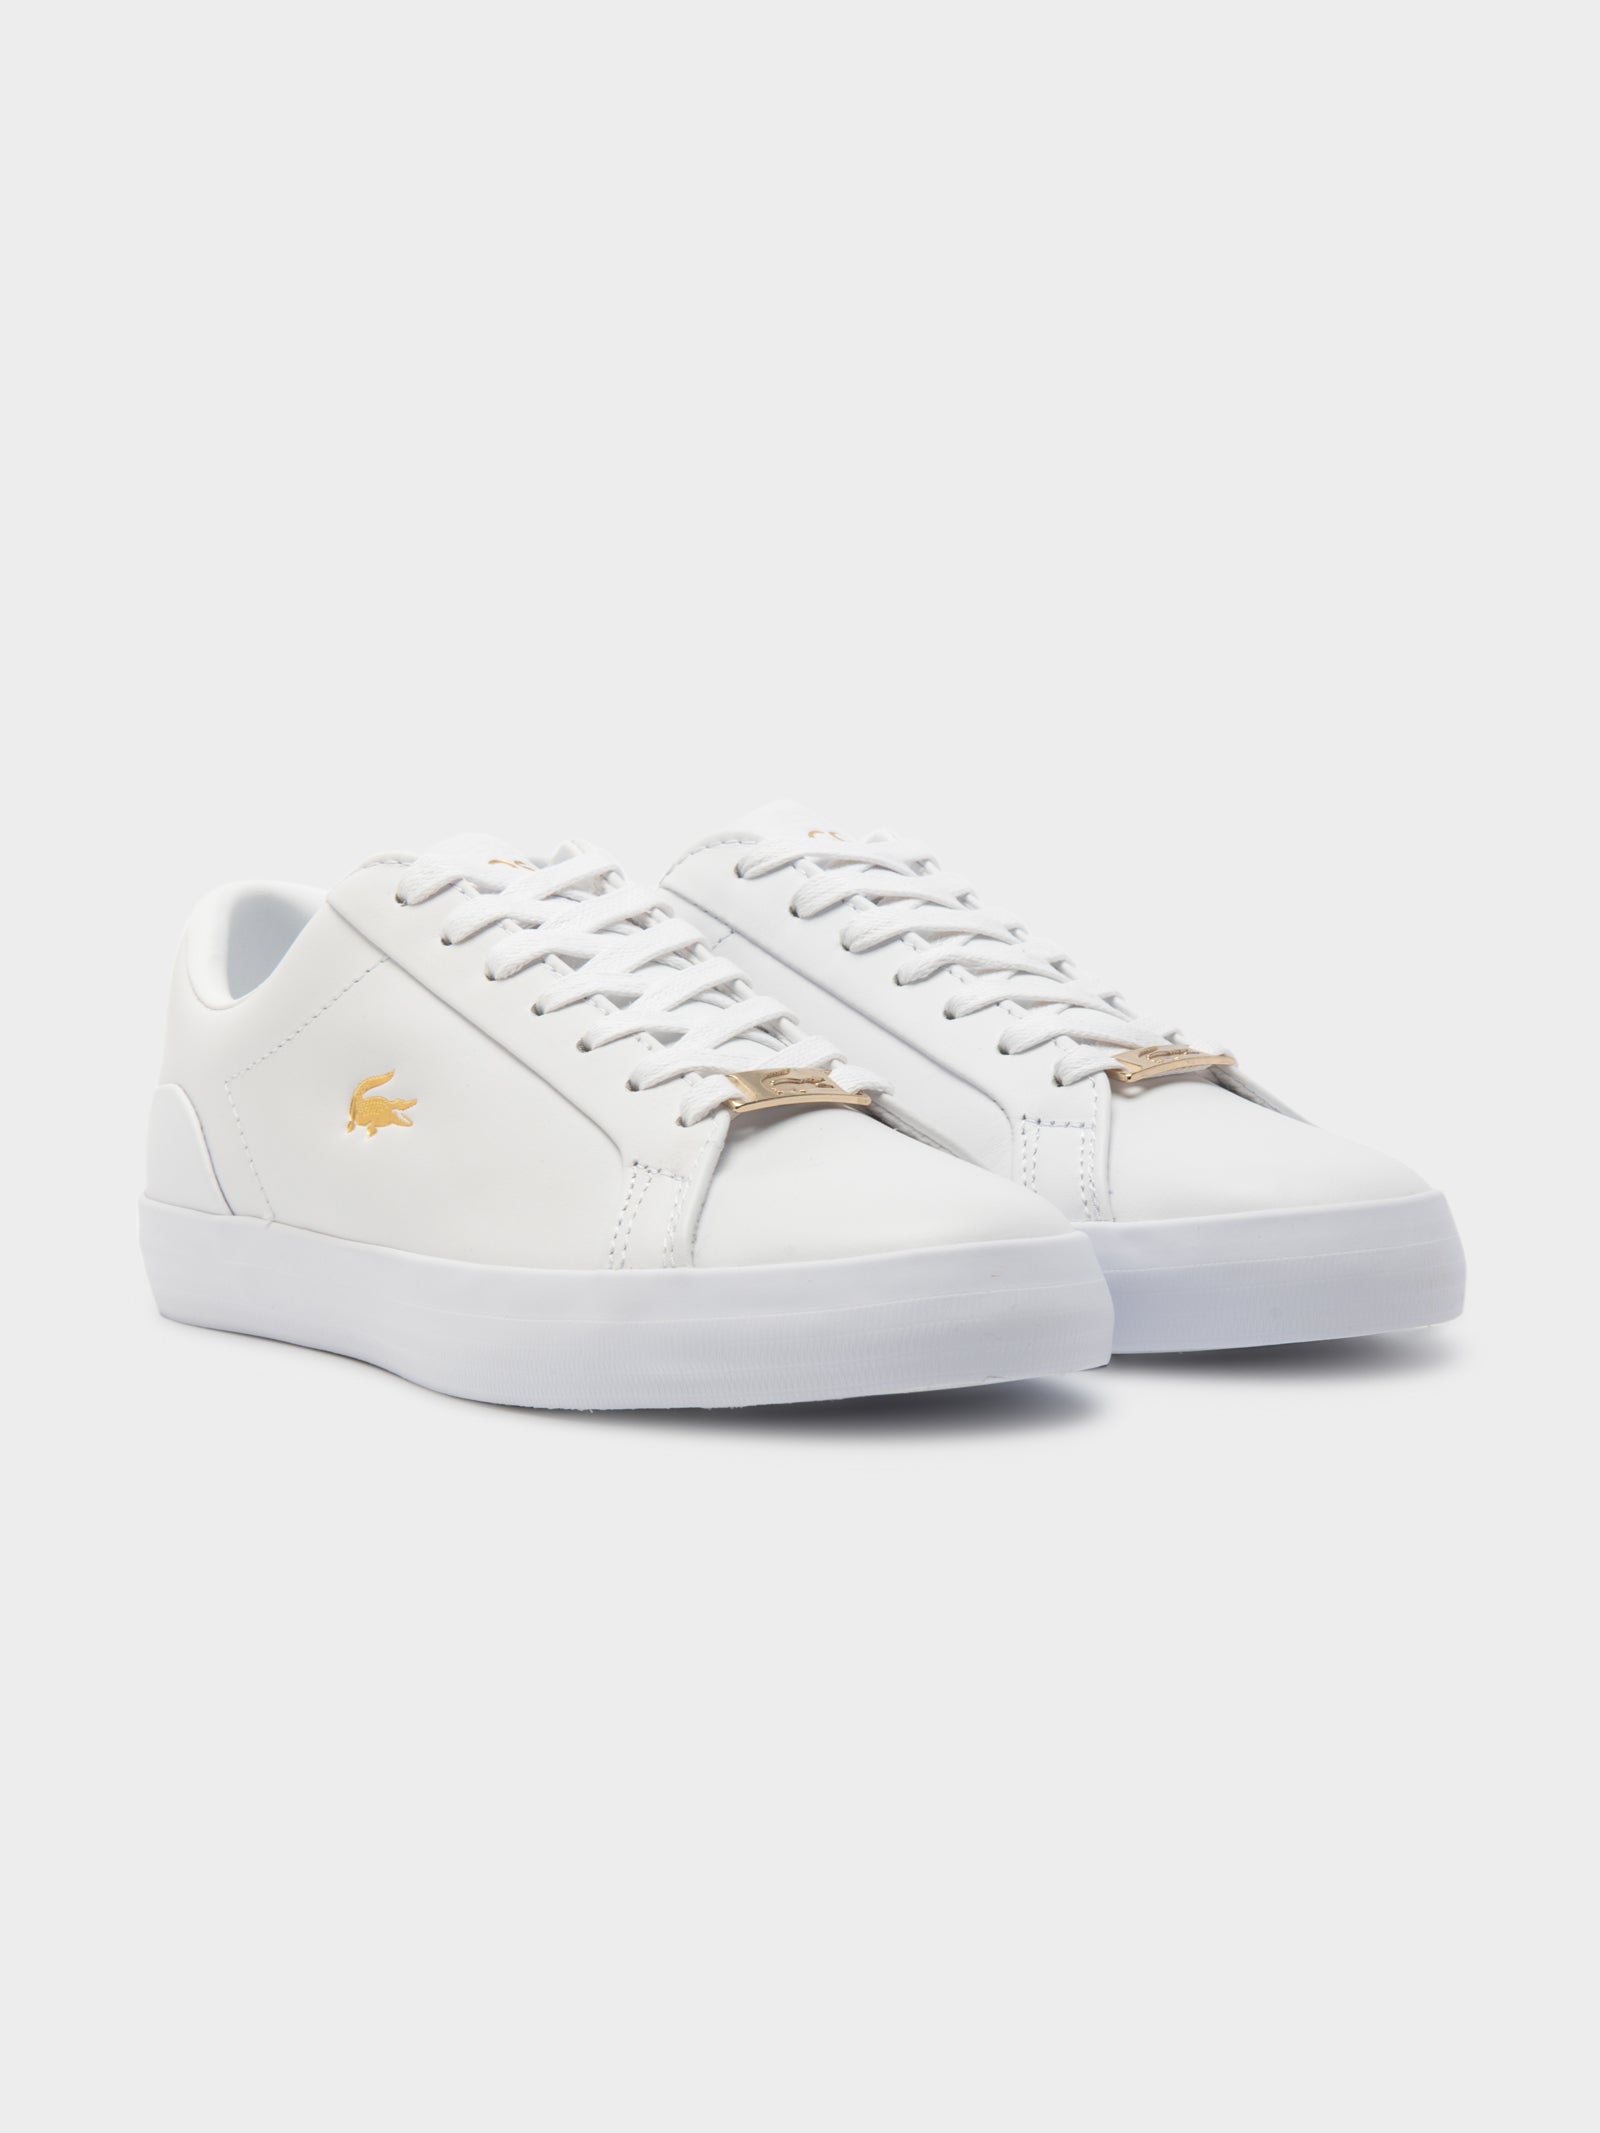 Womens Lerond 0922 1 in White & Gold - Glue Store